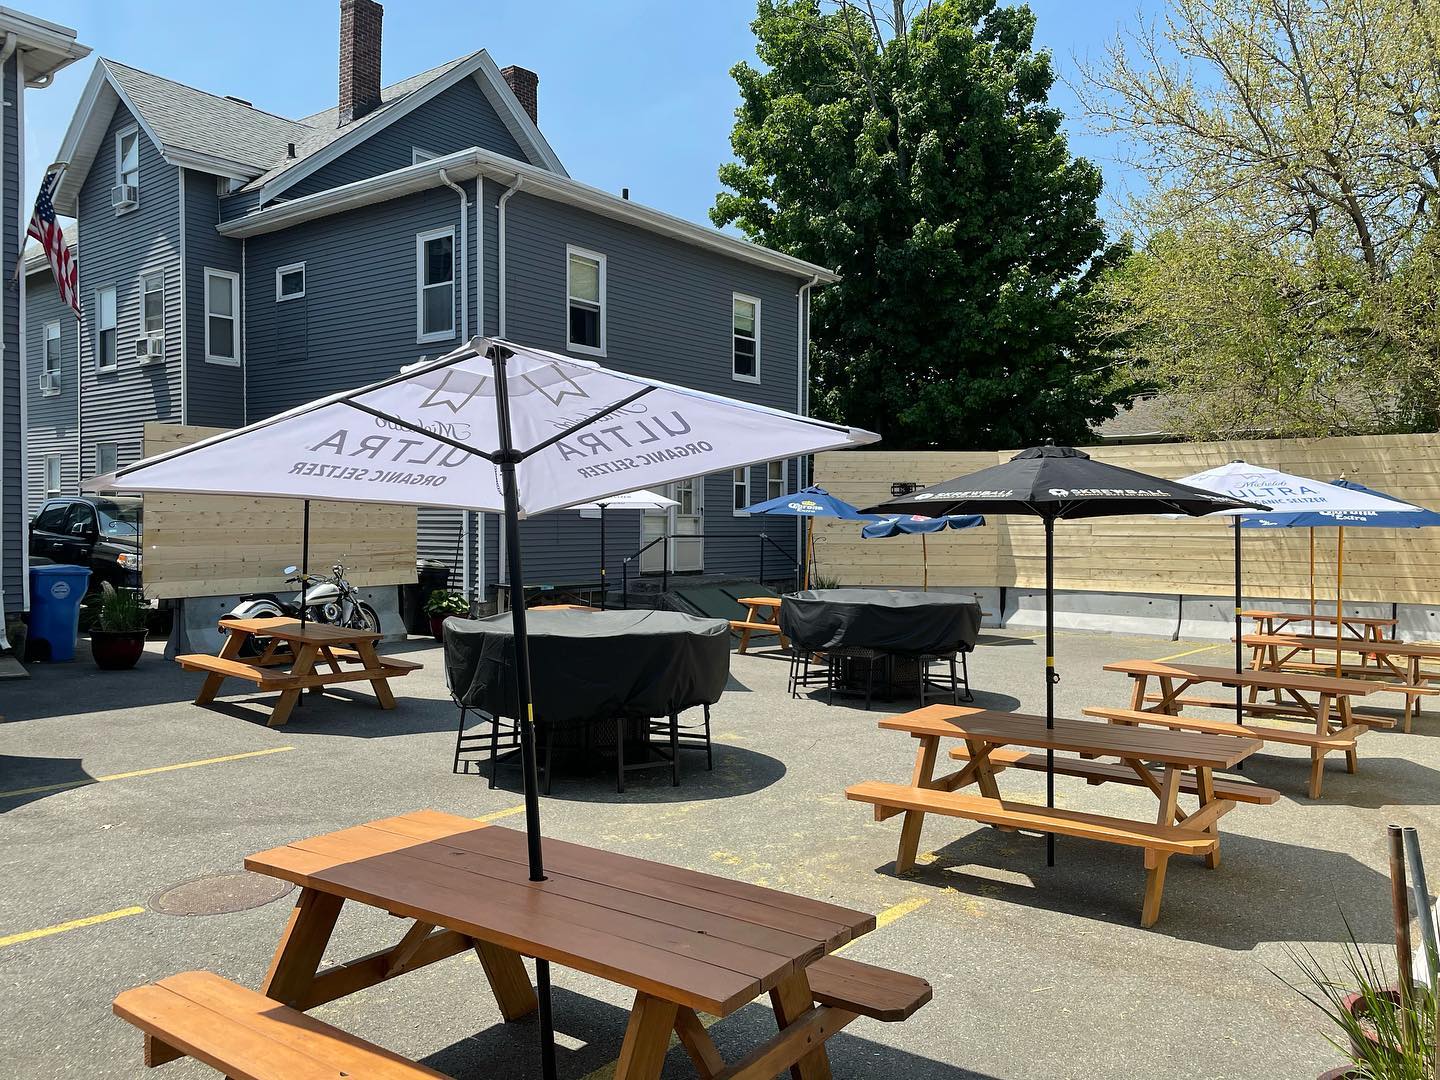 PATIO UPDATE!Yes, we know Patio Season starts today (May 1) in Waltham. HOWEVER, our patio will not be up and running until after the @runforcheryl on May 7th.We are excited for another patio season and look forward to hosting many events out back. Graduation parties, banquets, anniversary parties, retirement parties. We do it all. So if you’re looking for a laid back space to host your event, reach out!